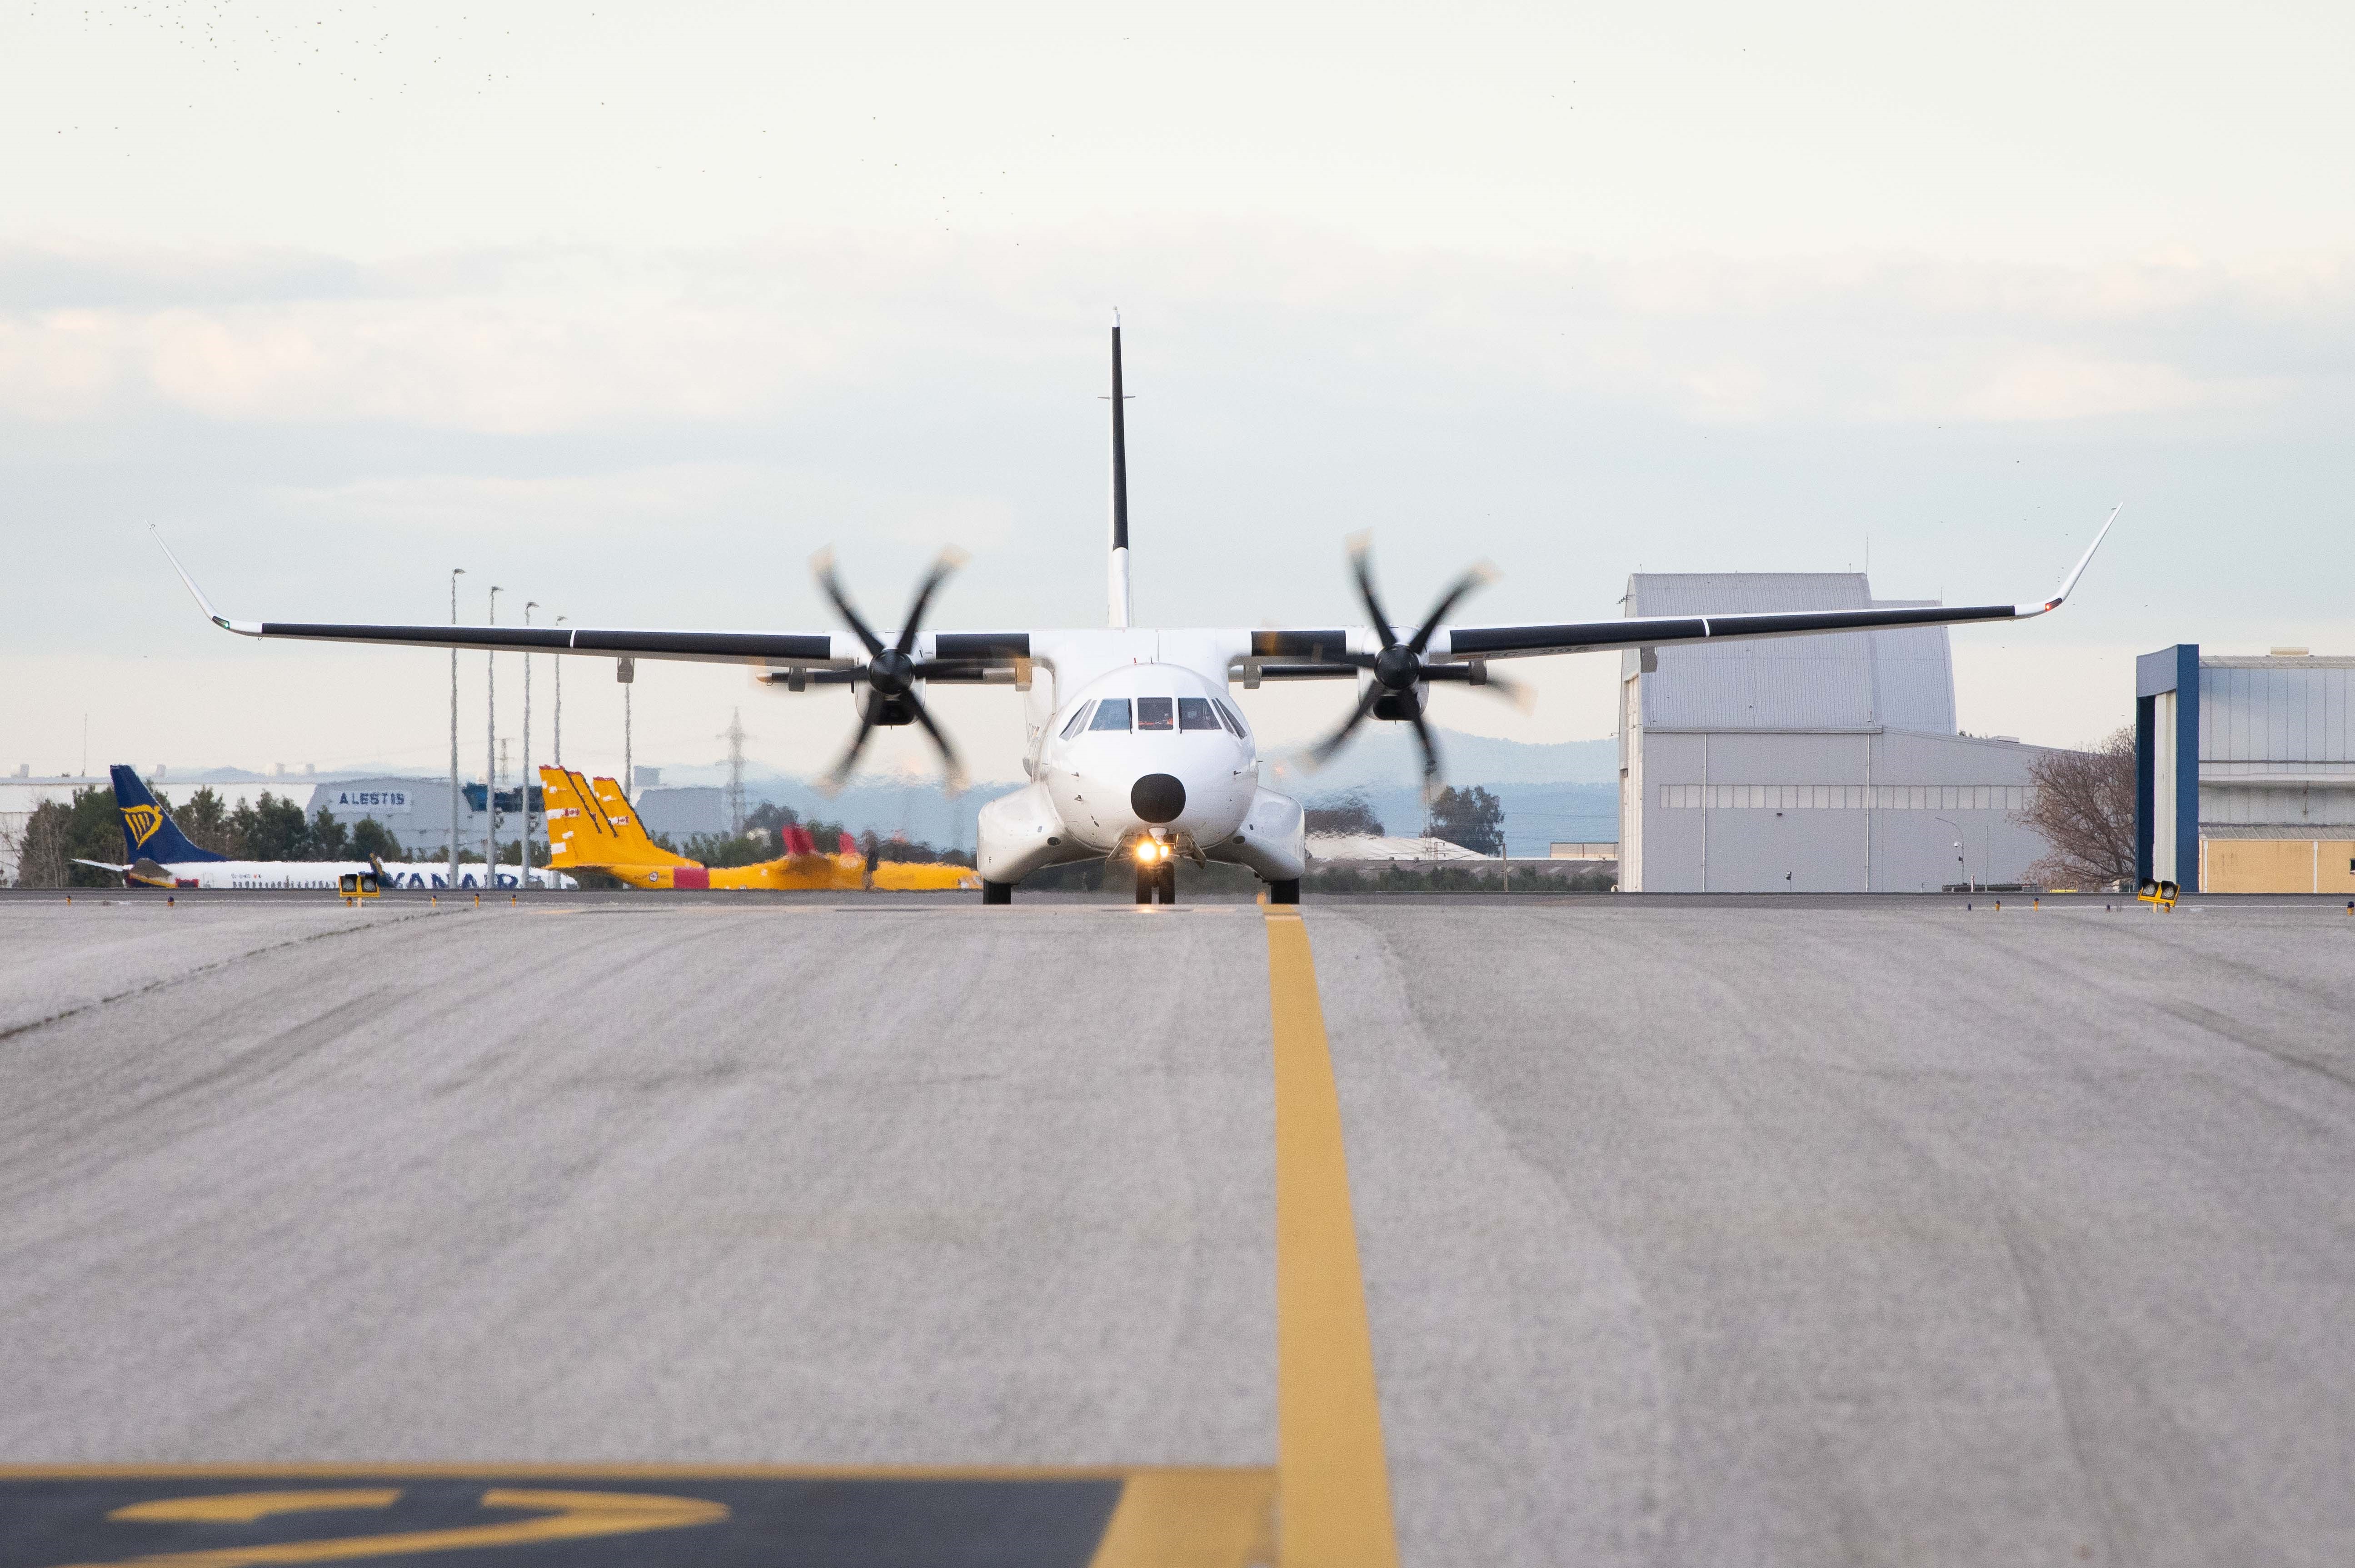 Airbus’s C295 technology demonstrator of Clean Sky 2 makes its maiden flight